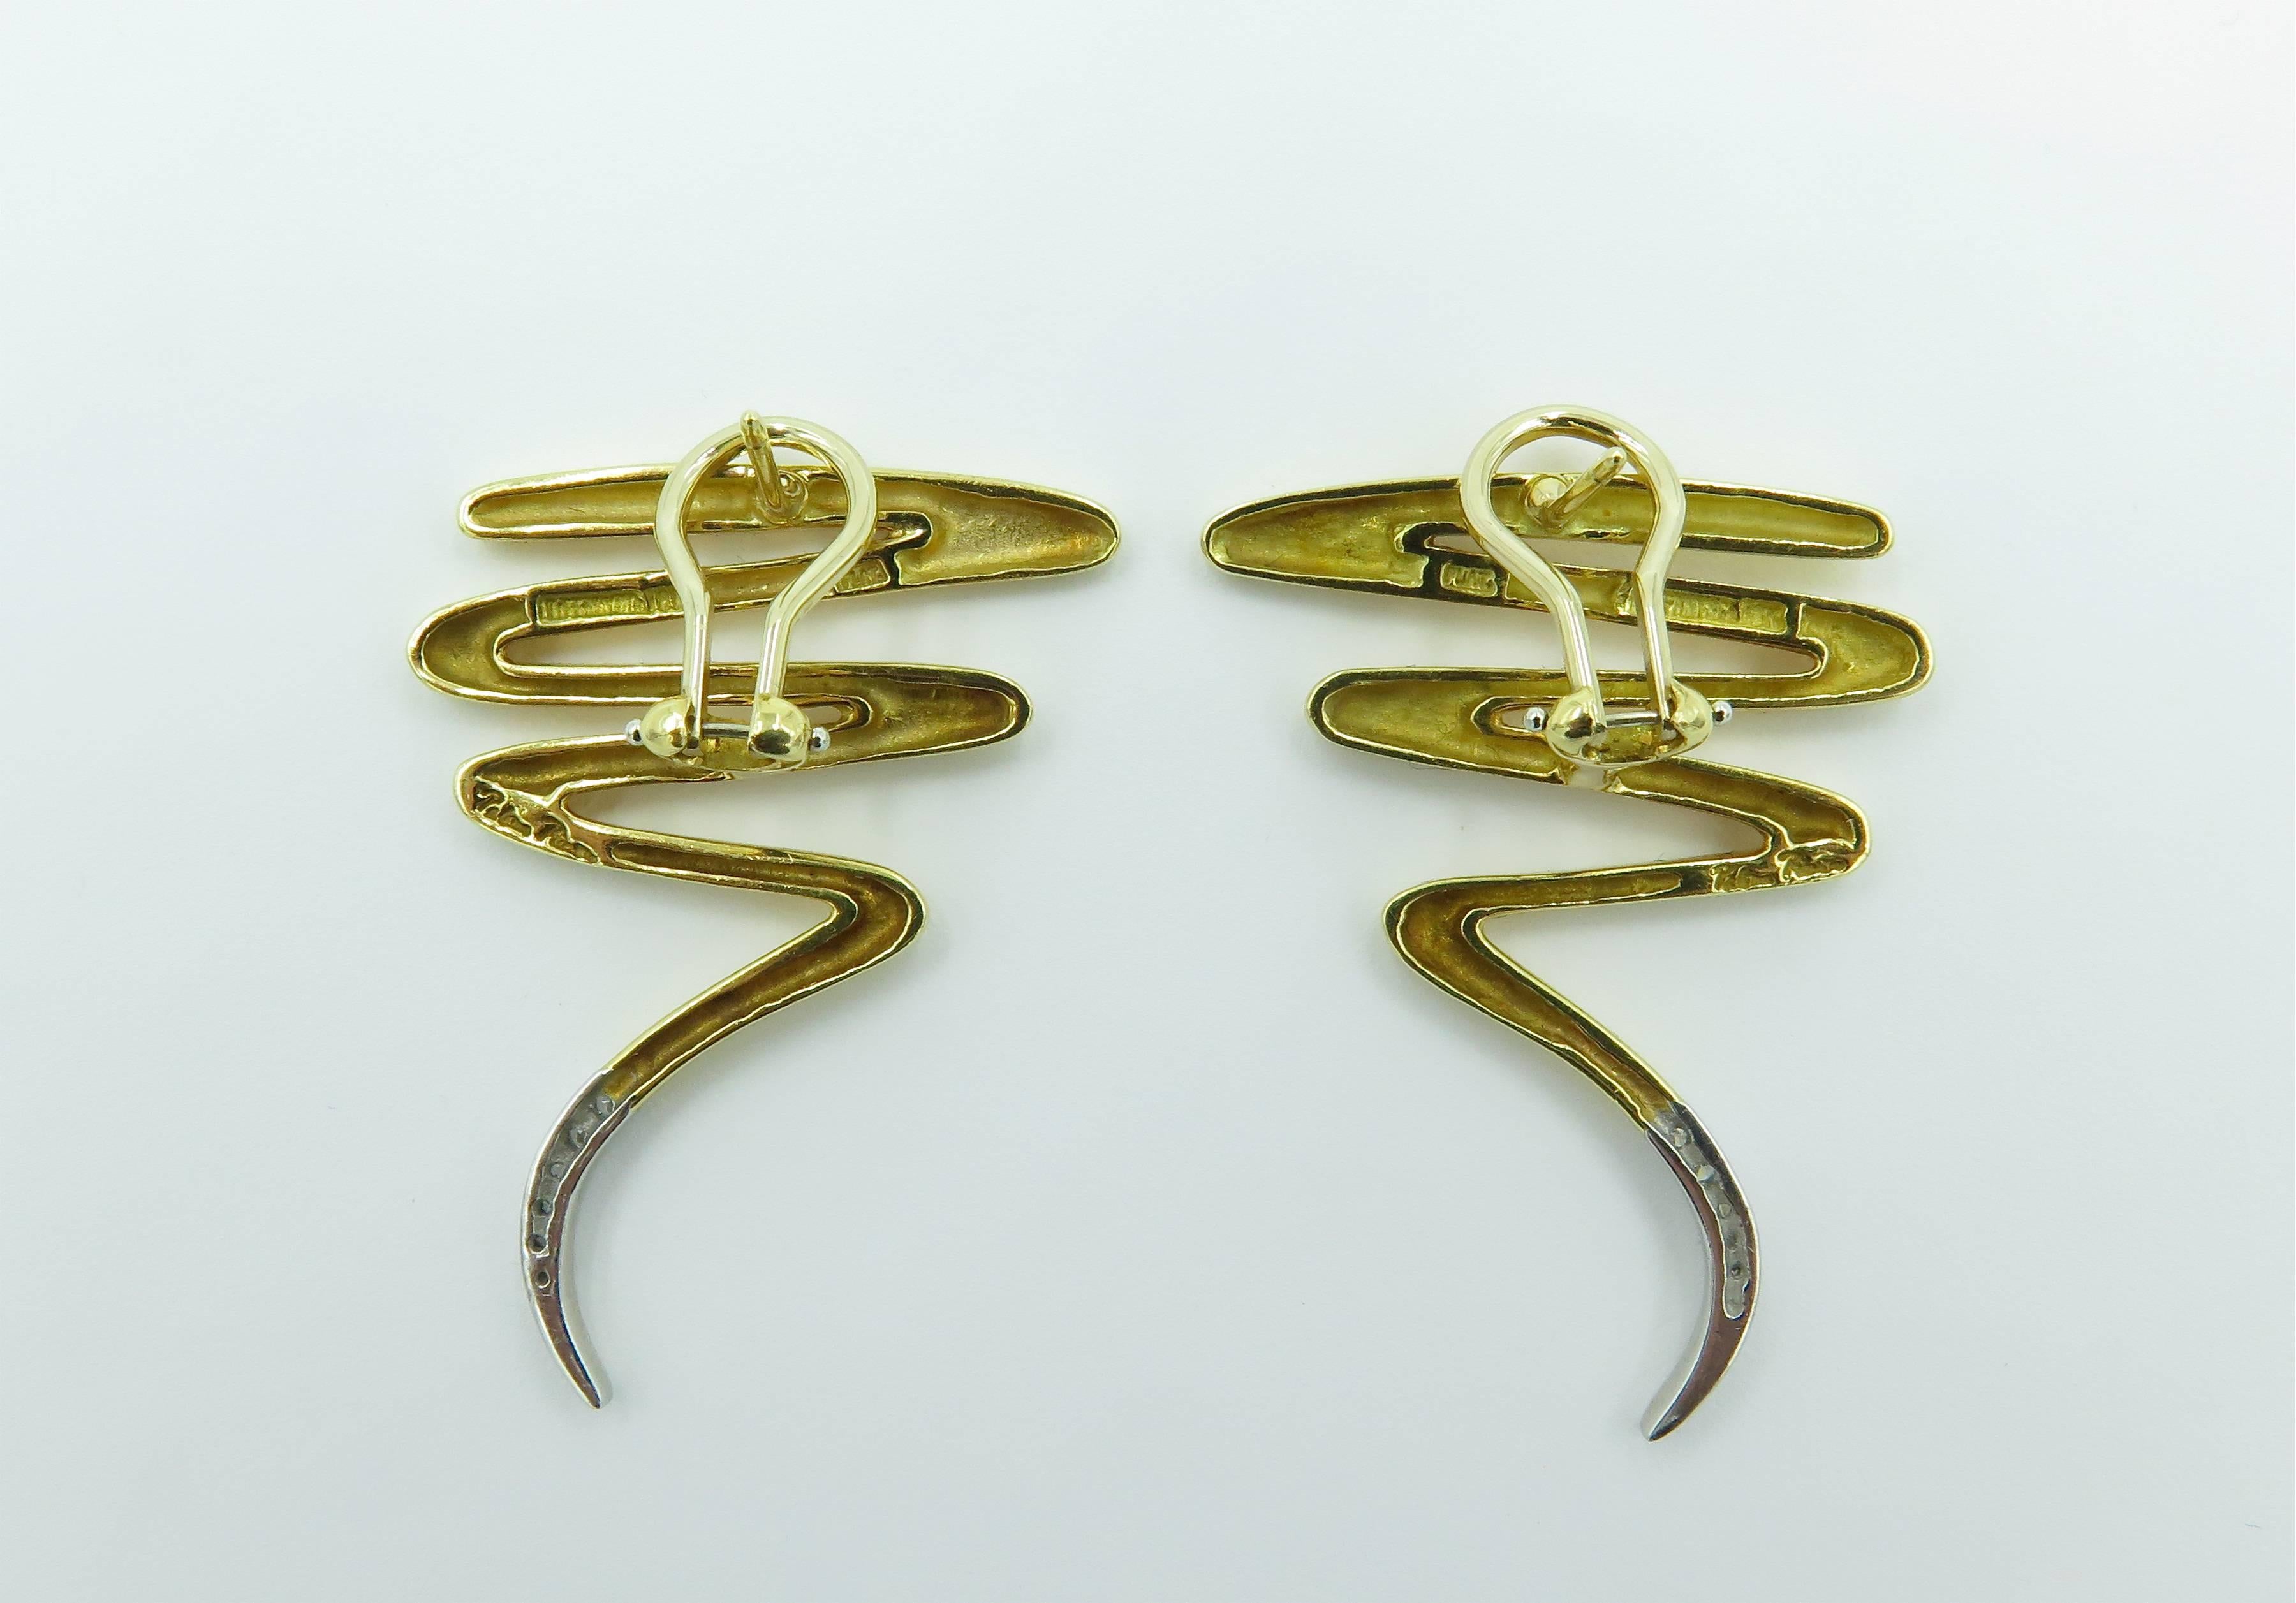 A pair of 18 karat yellow gold, platinum and diamond Scribble earrings. Paloma Picasso, Tiffany & Co. In polished gold, enhanced by circular cut diamonds at the bottom. Length is approximately 1 1/2 inches, gross weight is approximately 15.5 grams.